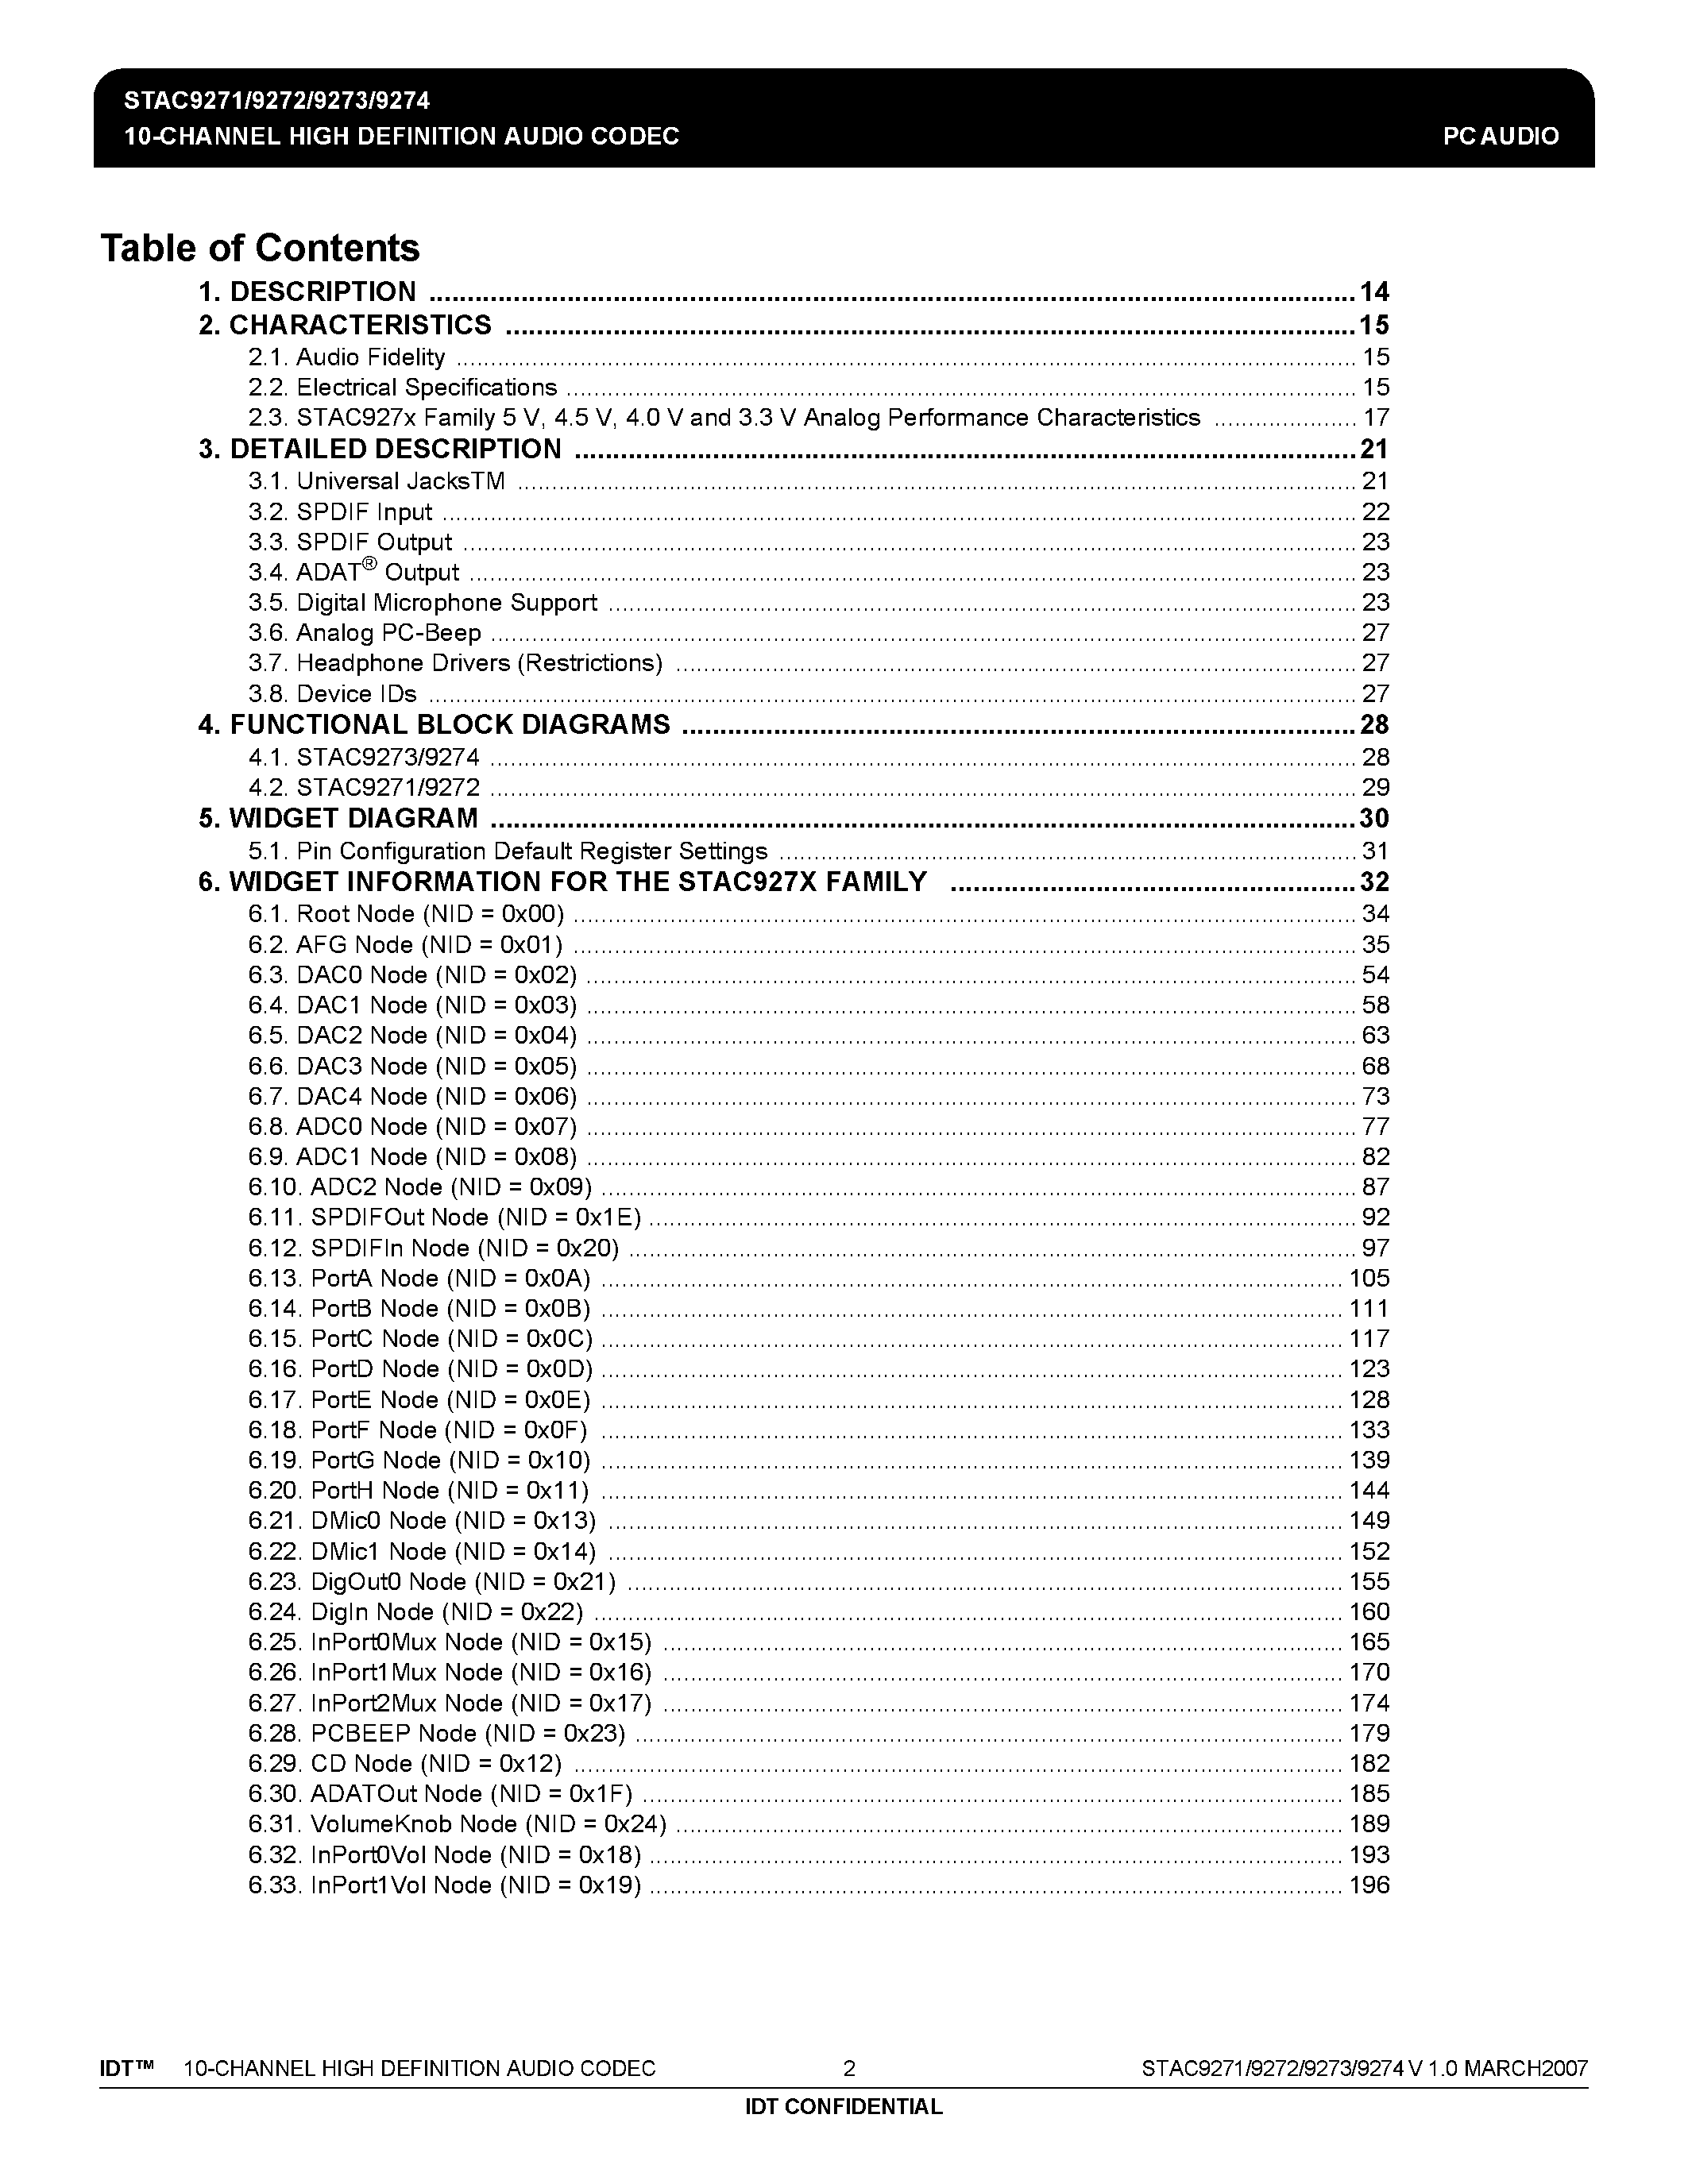 Datasheet STAC9271 - (STAC9271 - STAC9274) 10-CHANNEL HIGH DEFINITION AUDIO CODEC page 2